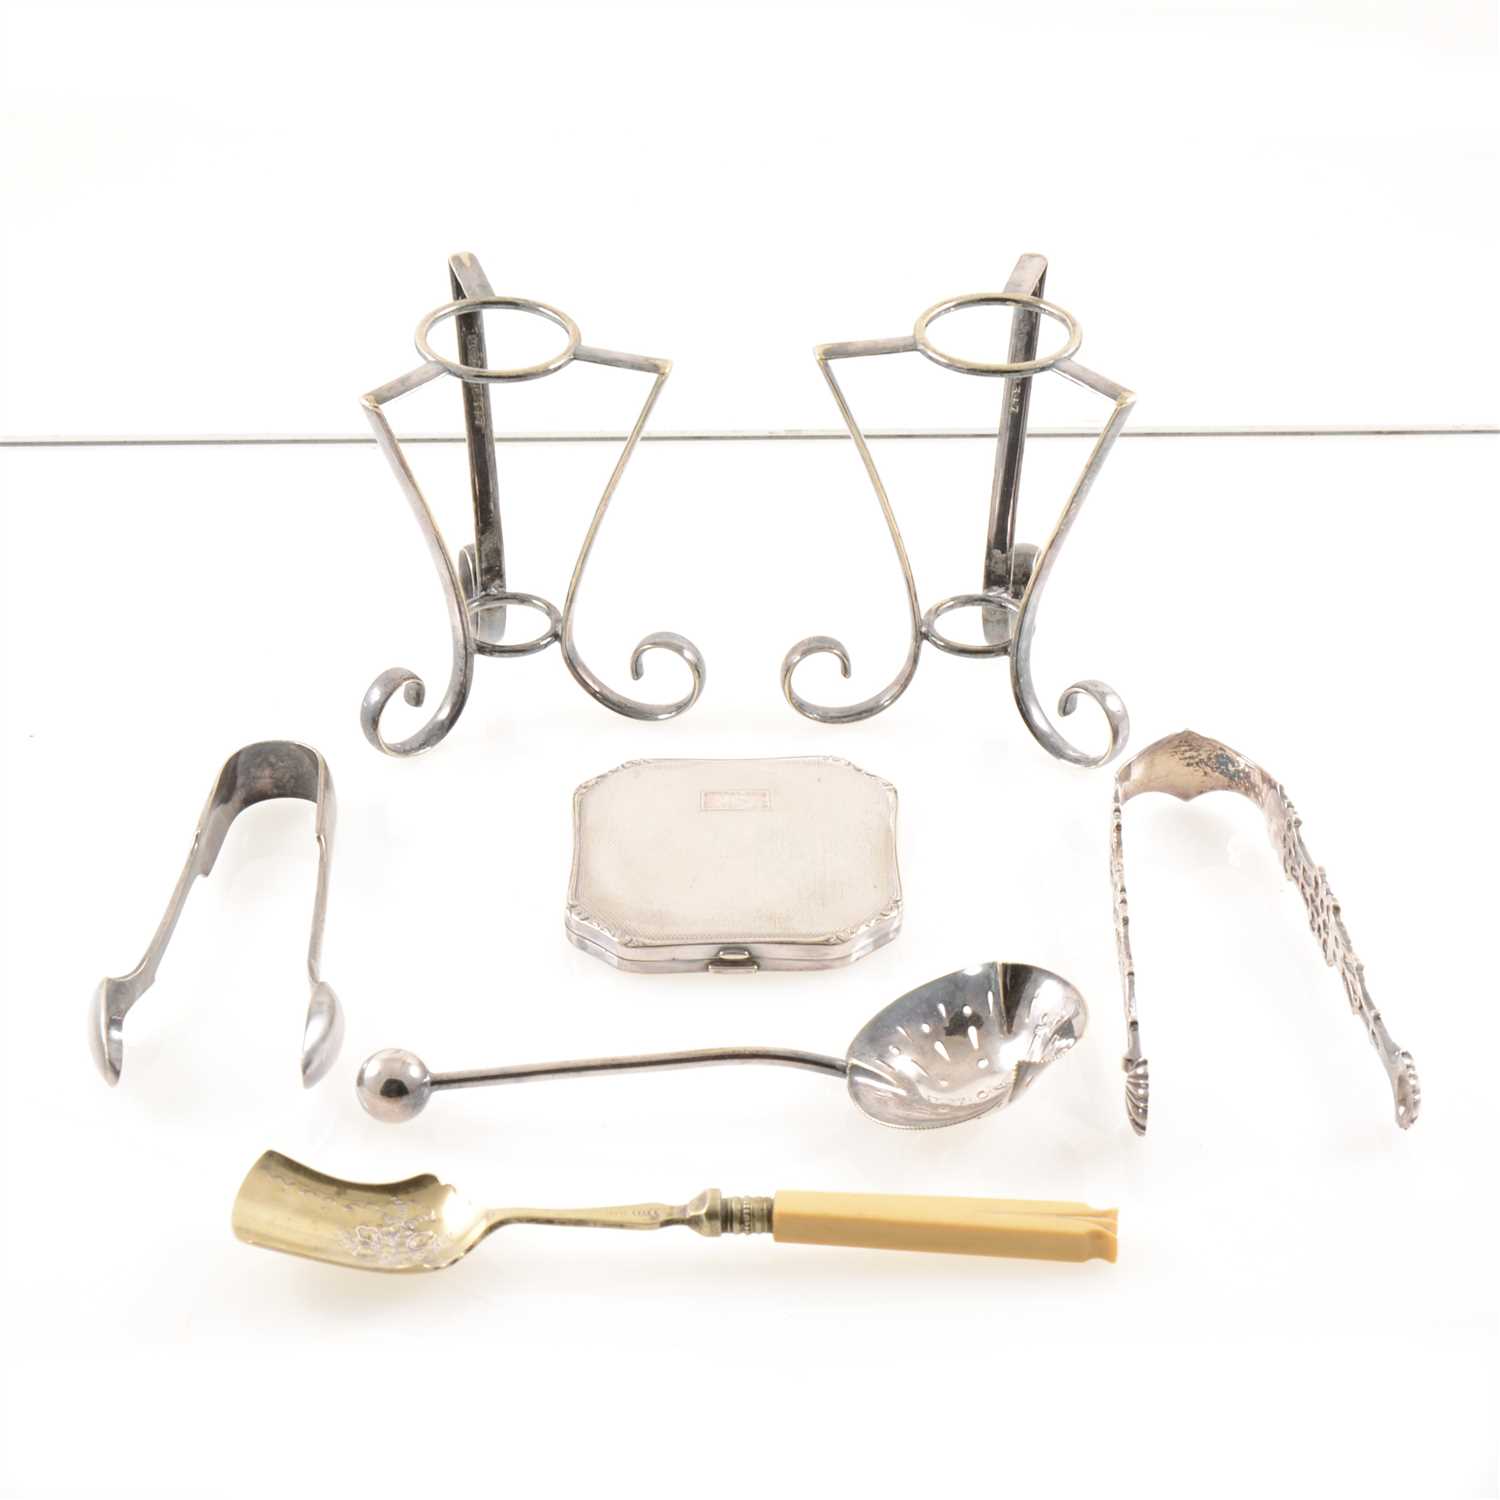 Lot 229 - A collection of small silver and silver-plated items, elephant teether Birmingham 1968, fluted salt and pepper